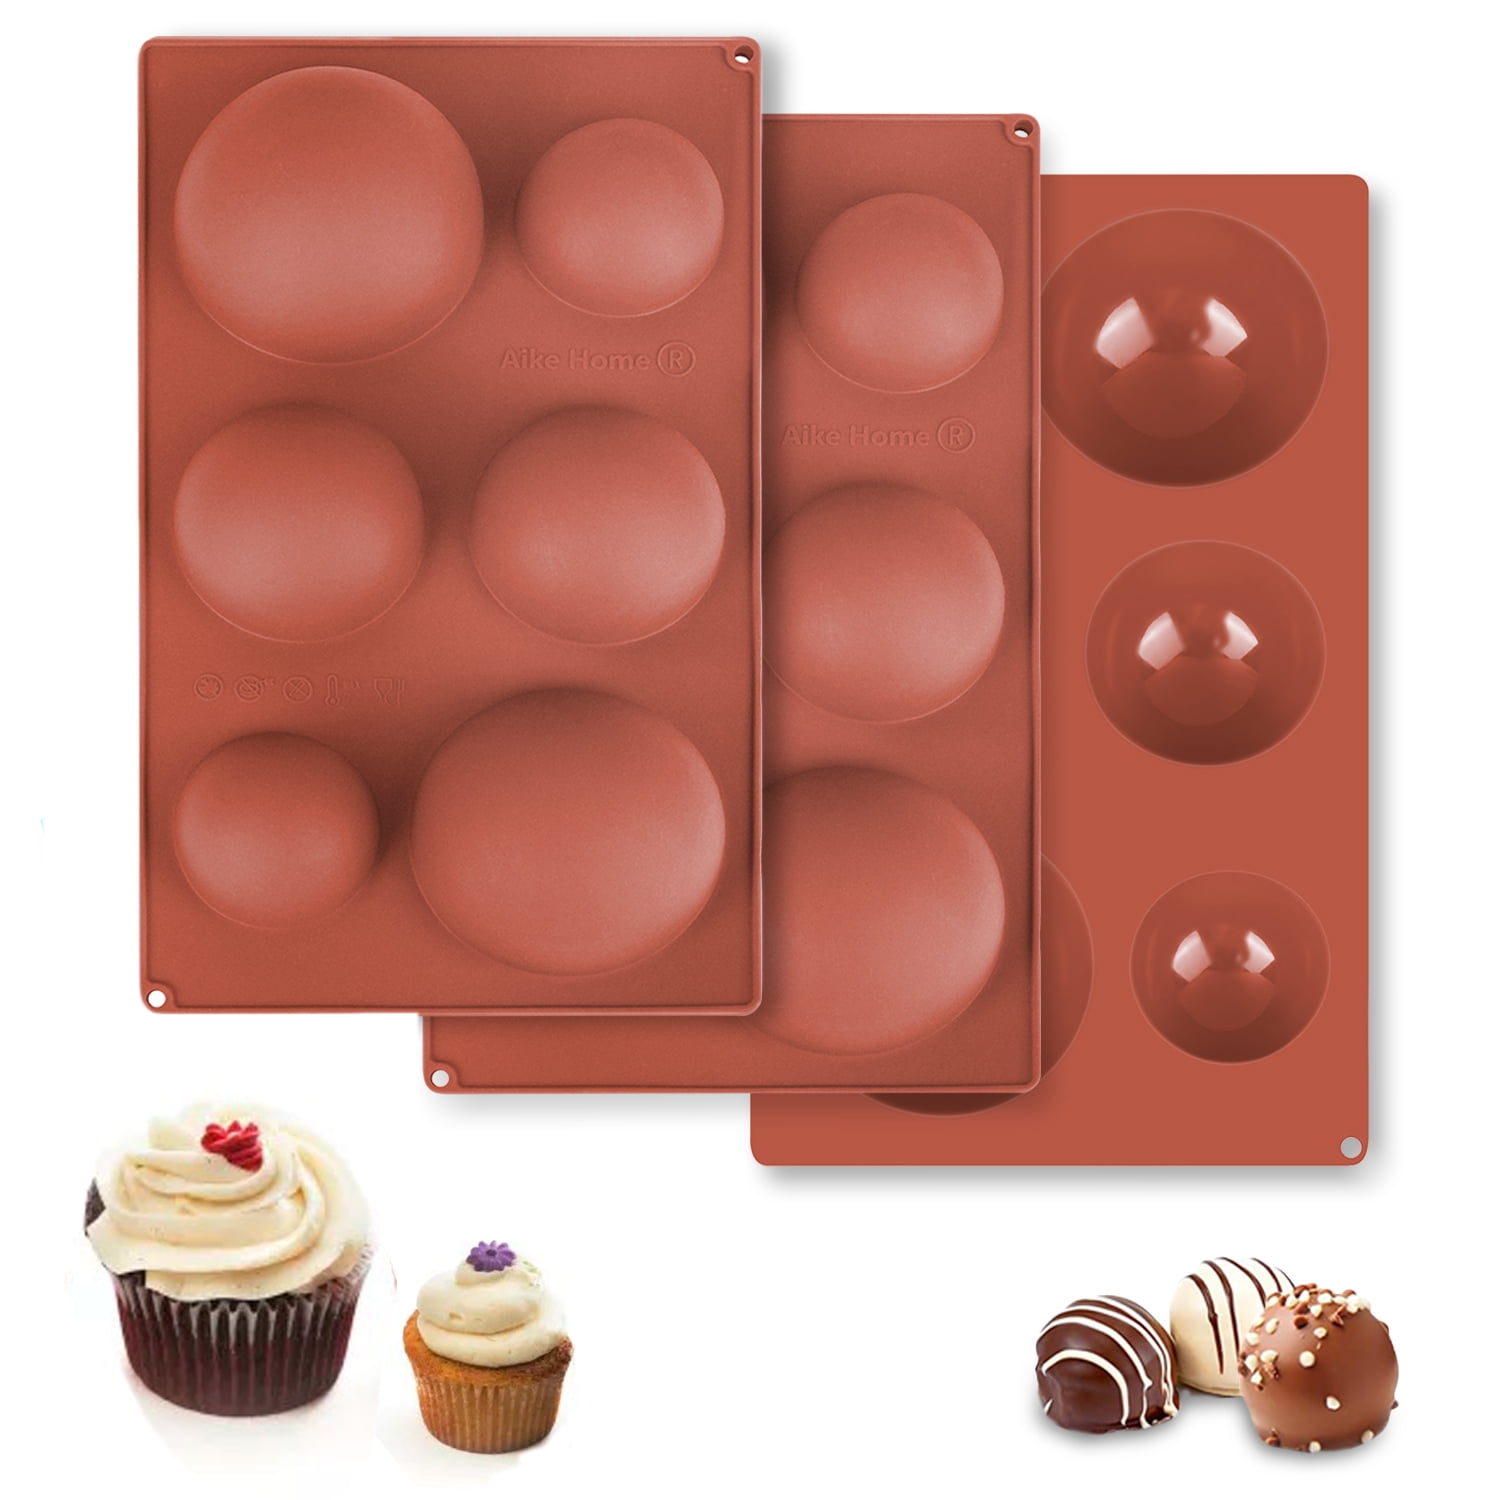 Details about   6 Cups Silicone Baking Mold Hot Chocolate Bomb Cake Jelly Dome Mousse Tray USA 